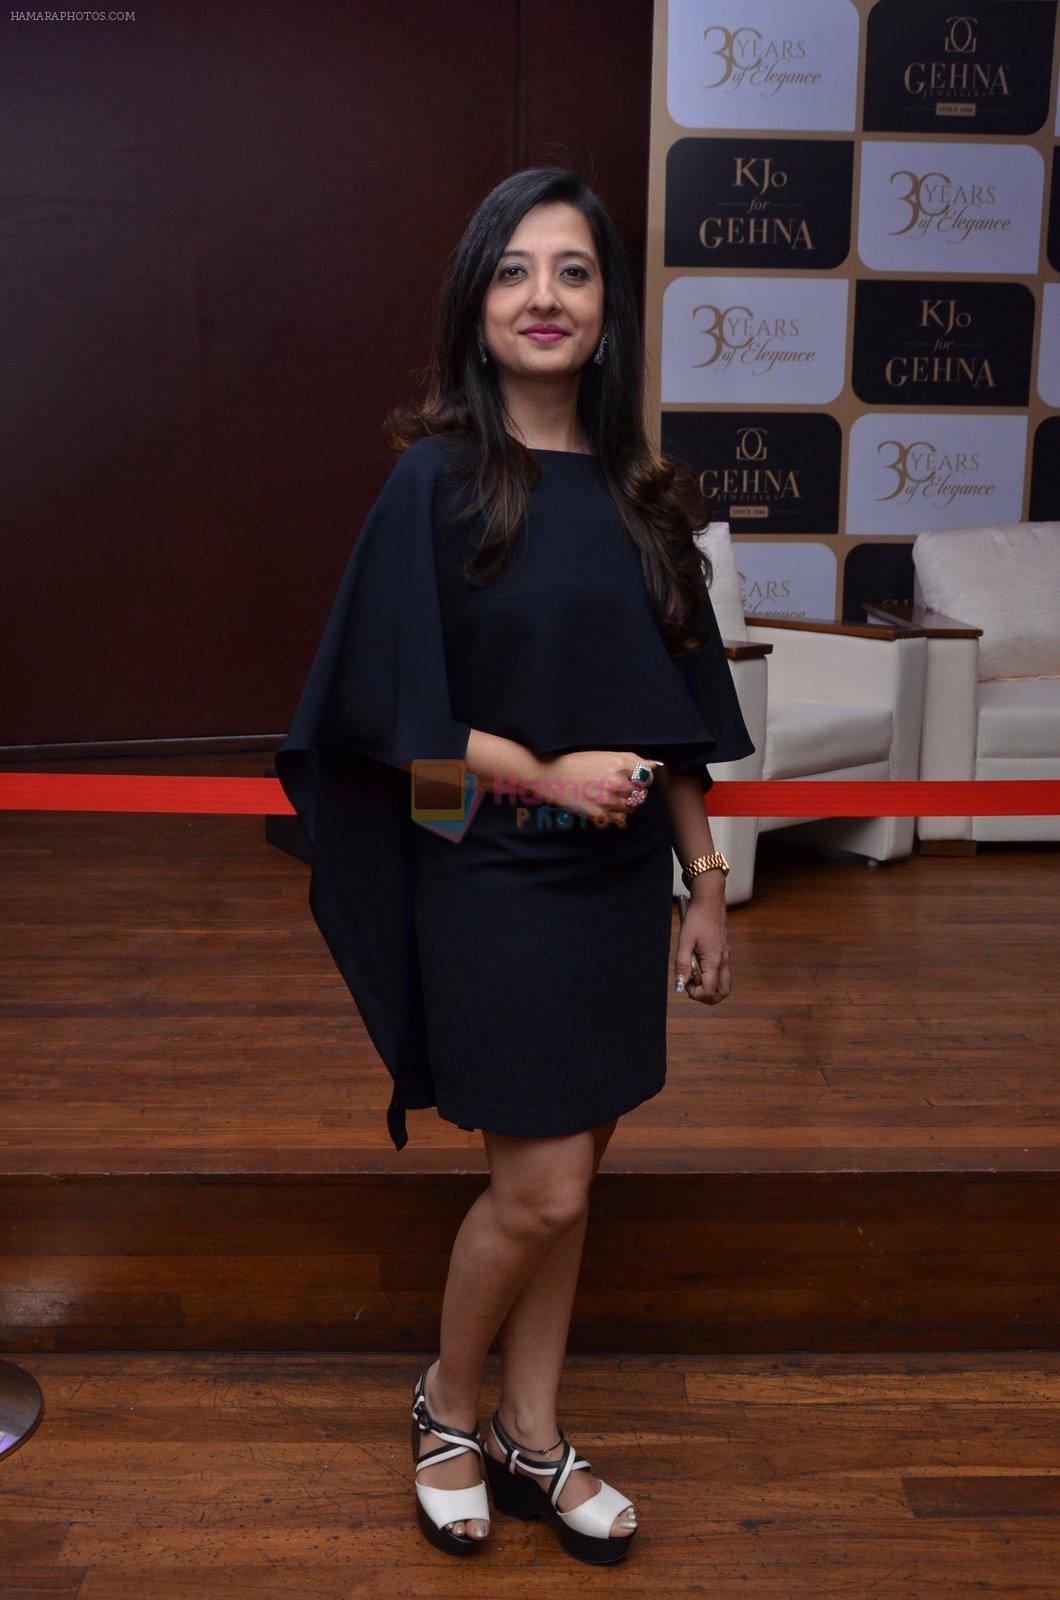 Amy Billimoria at Gehna 30 years anniversary on 15th March 2016